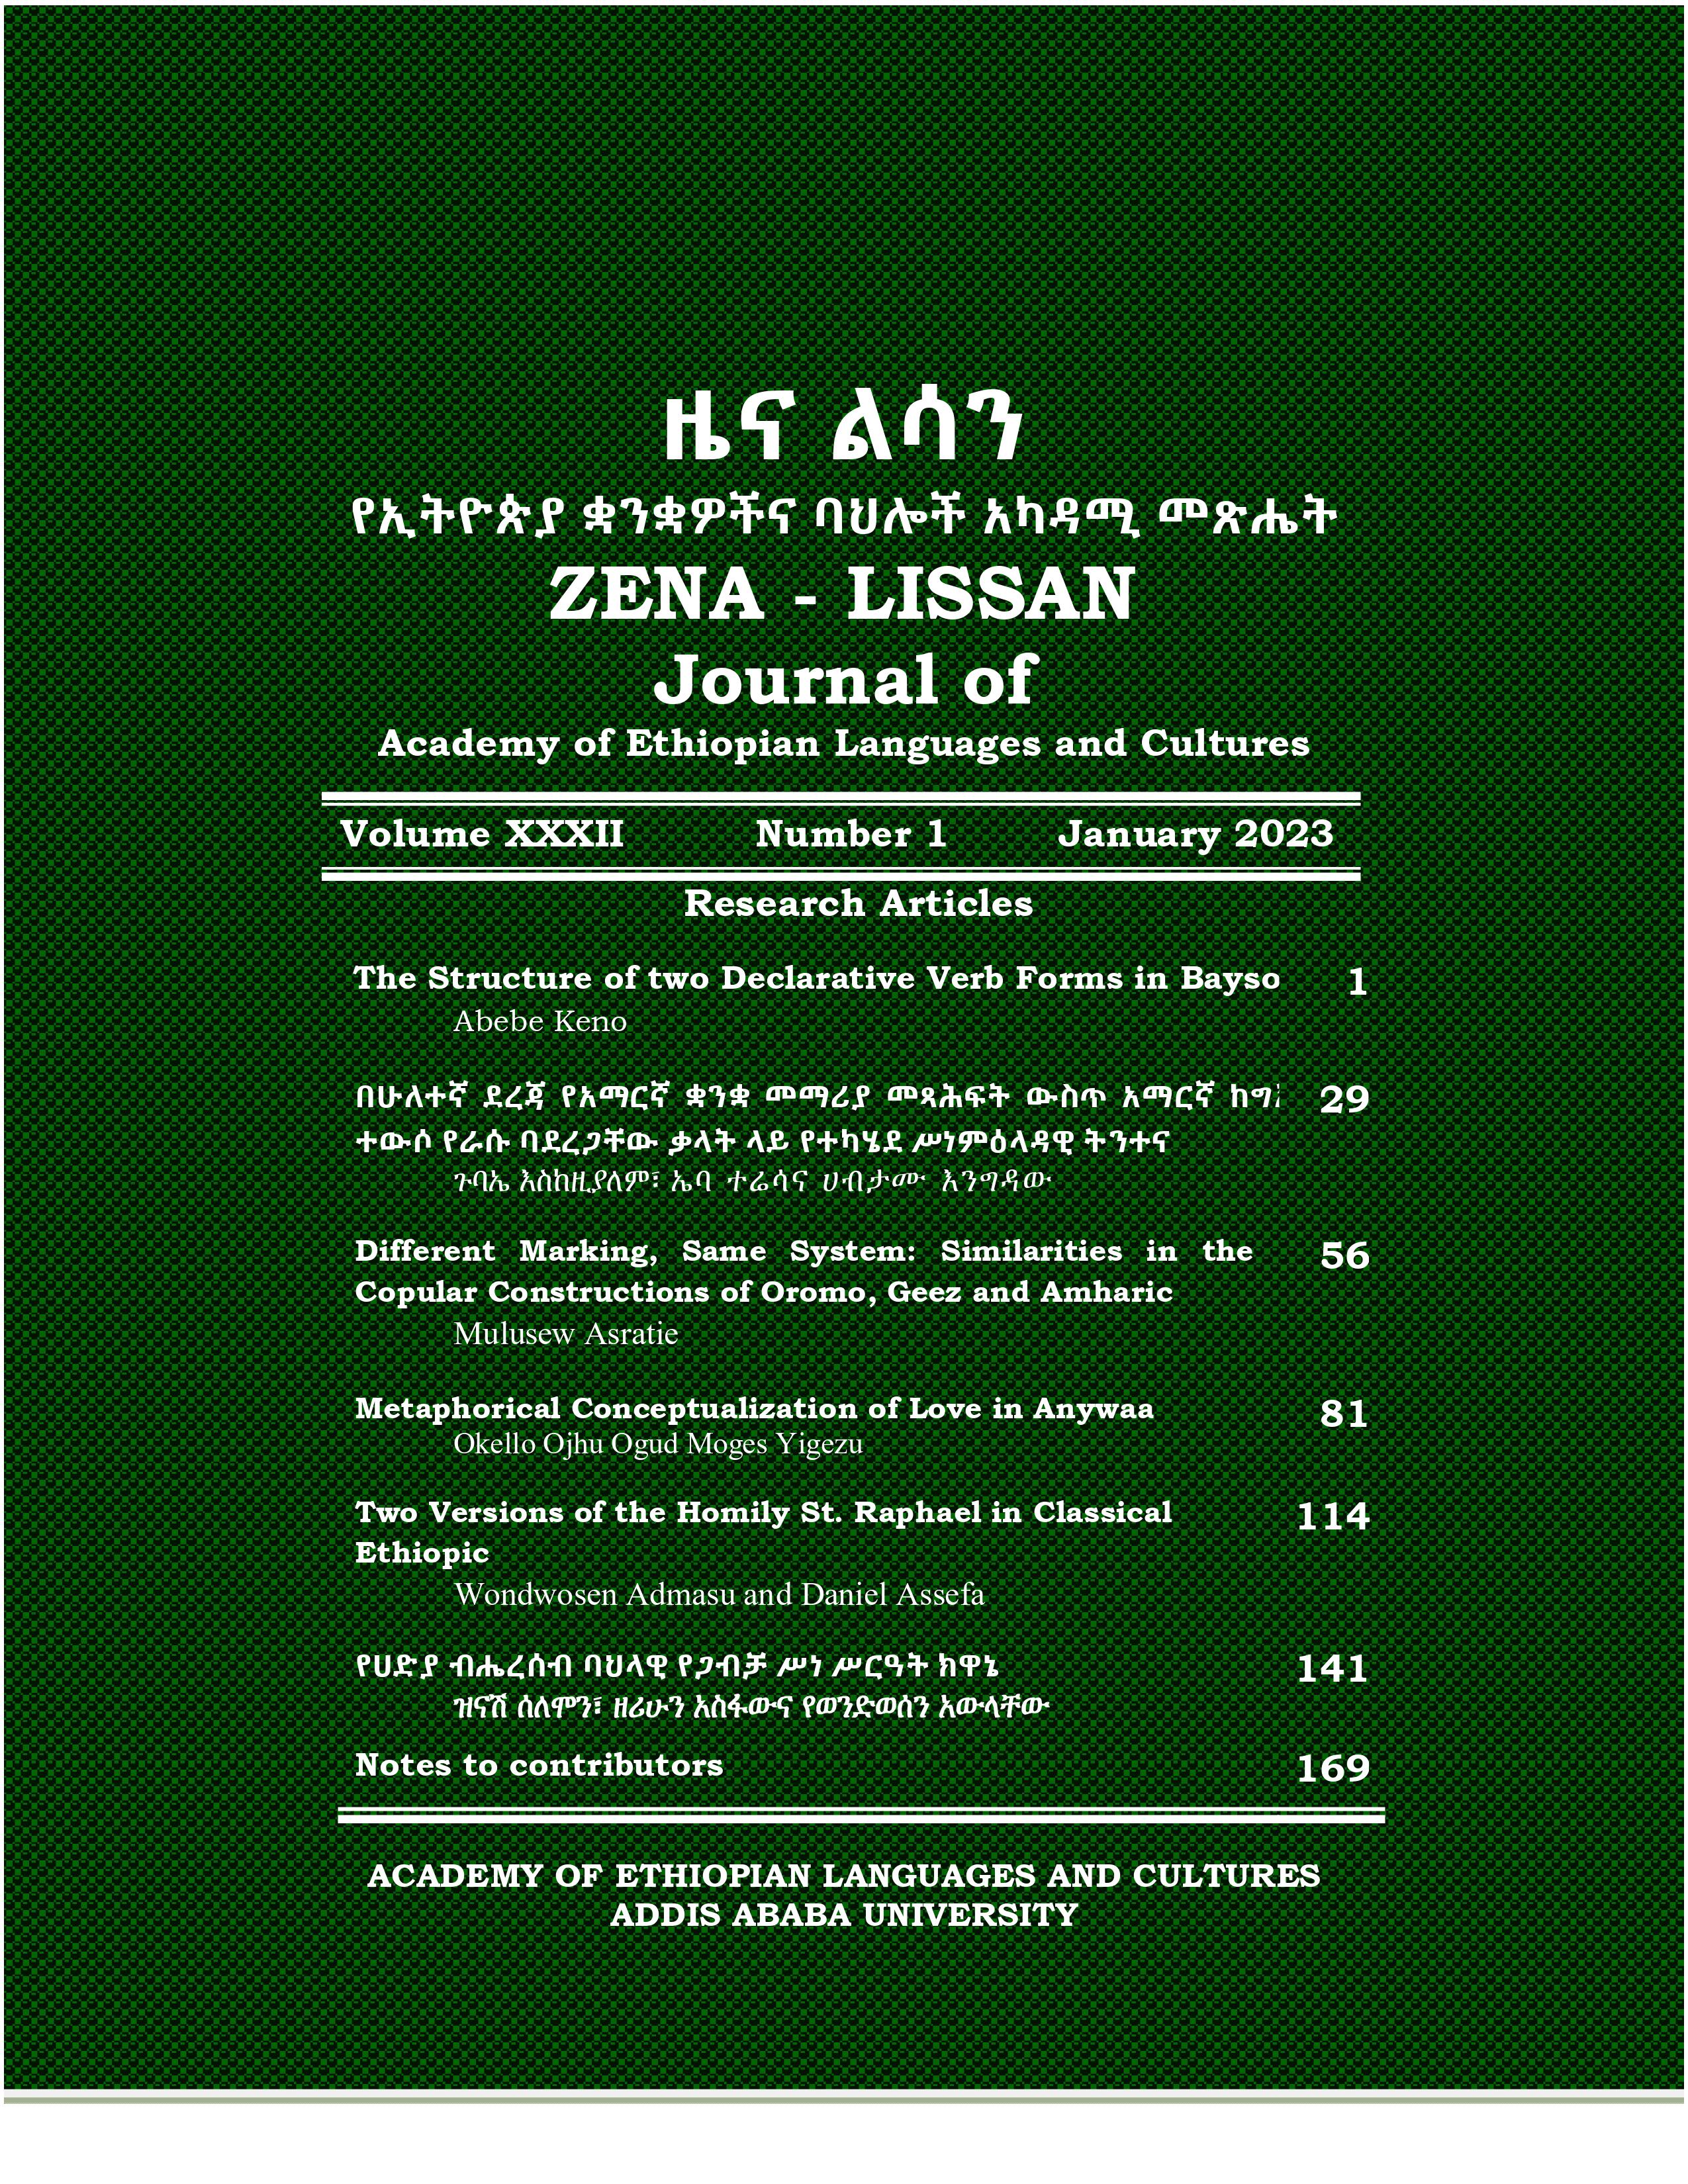 					View Vol. 32 No. 1 (2023): ZENA-LISSAN, JOURNAL OF ACADEMY OF ETHOPIAN LANGUAGES AND CULTURES
				